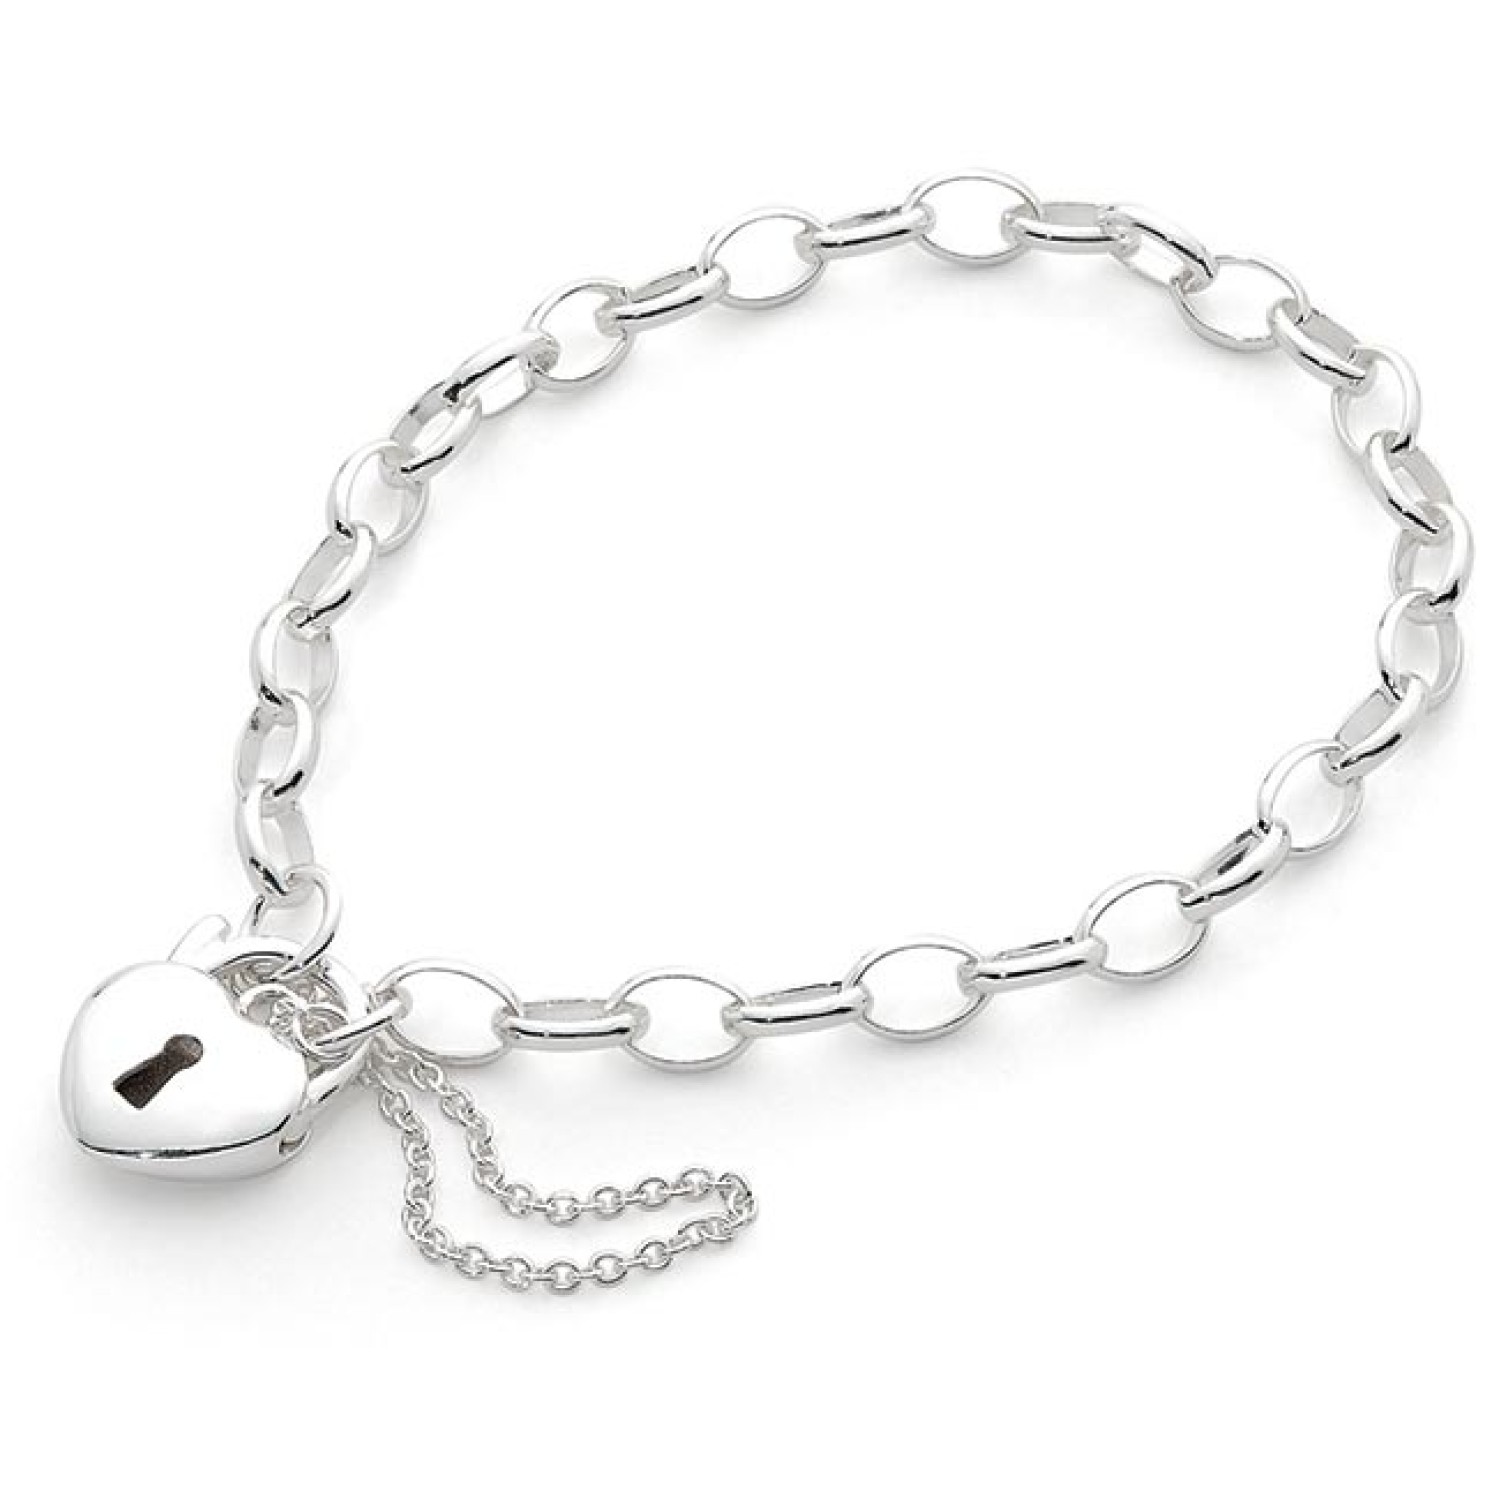 Sterling Silver Padlock Bracelet. A Sterling Silver Padlock Bracelet LAYBUY - Pay it easy, in 6 weekly payments and have it now. Only pay the price of your purchase, when you pay your instalments on time. A late fee may be applied for missed payments @chr